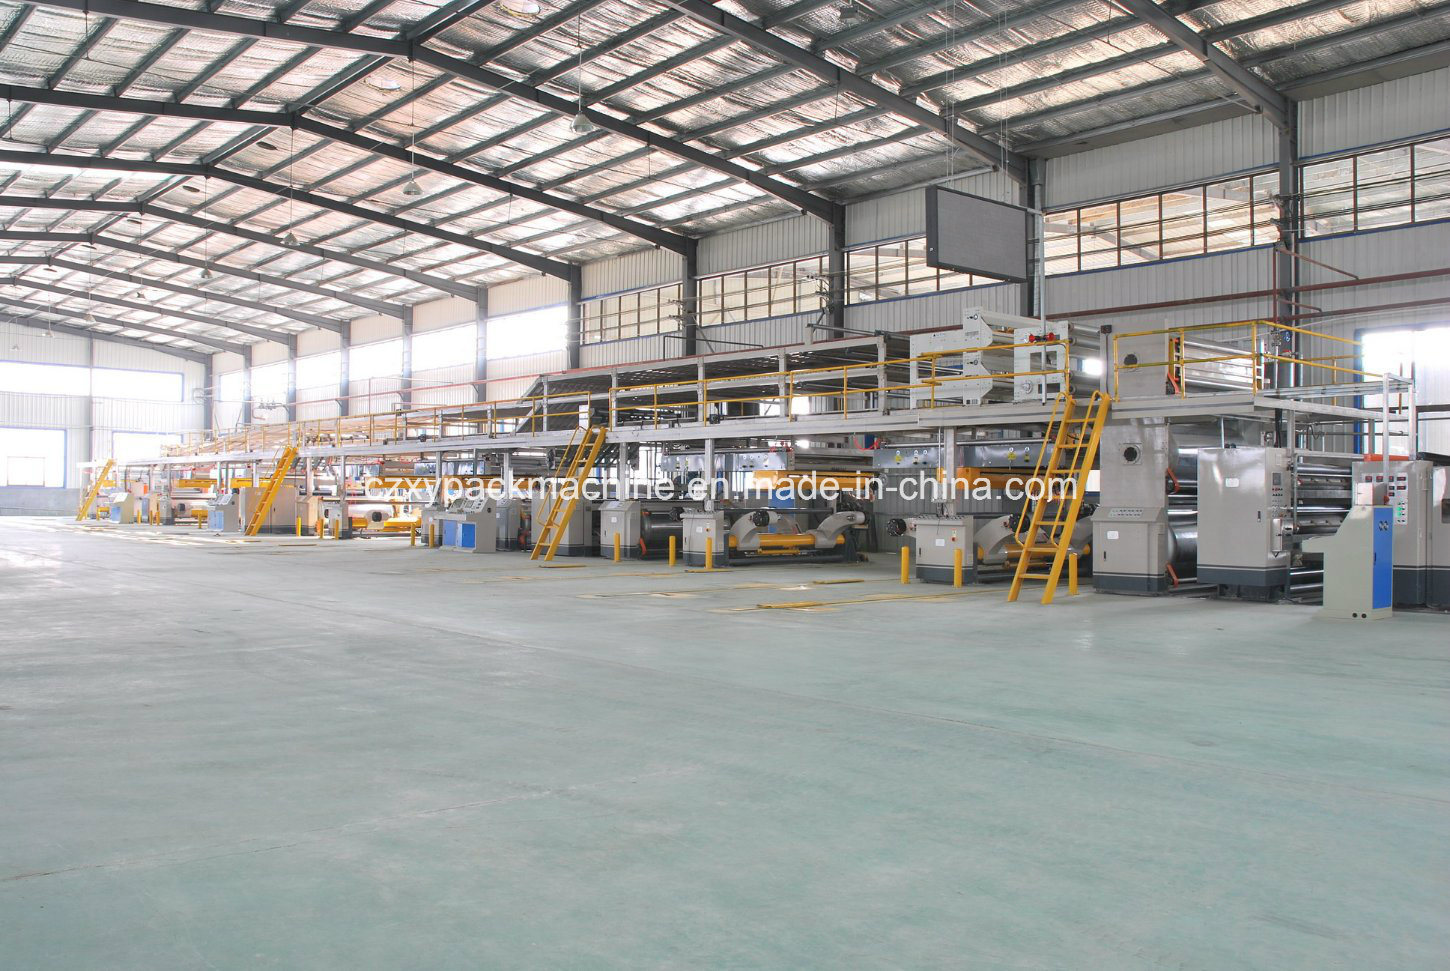 3 Ply High Speed Corrugated Cardboard Production Line